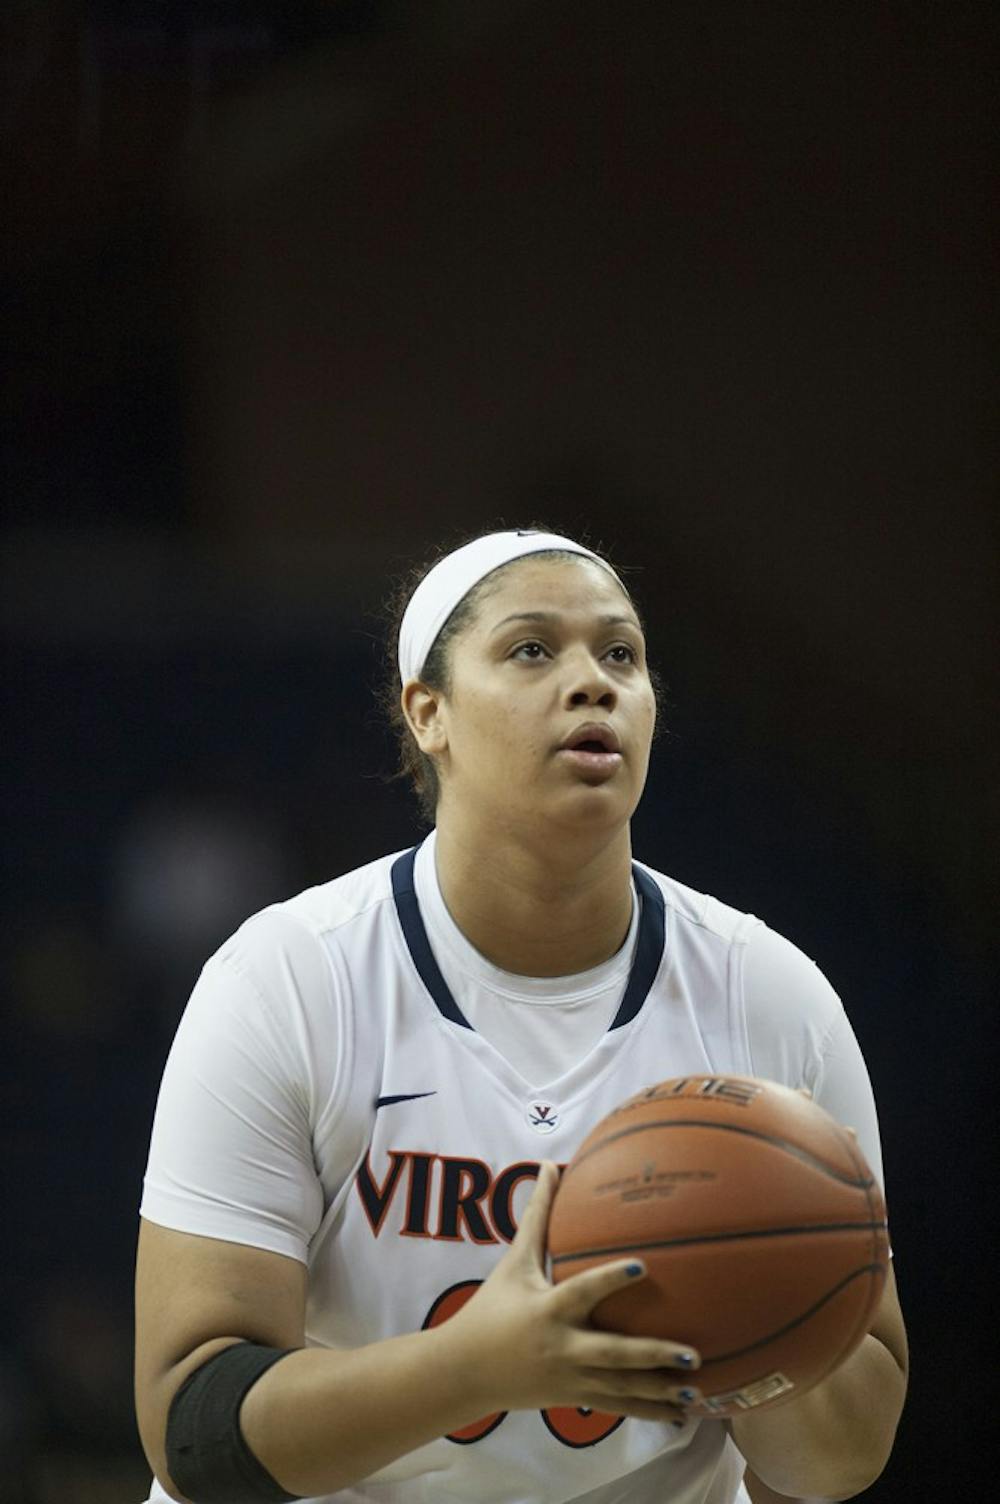 <p>Freshman center Debra Ferguson chipped in four points and three rebounds in 10 minutes Monday night against Norfolk State, earning coach Joanne Boyle's praise.&nbsp;</p>